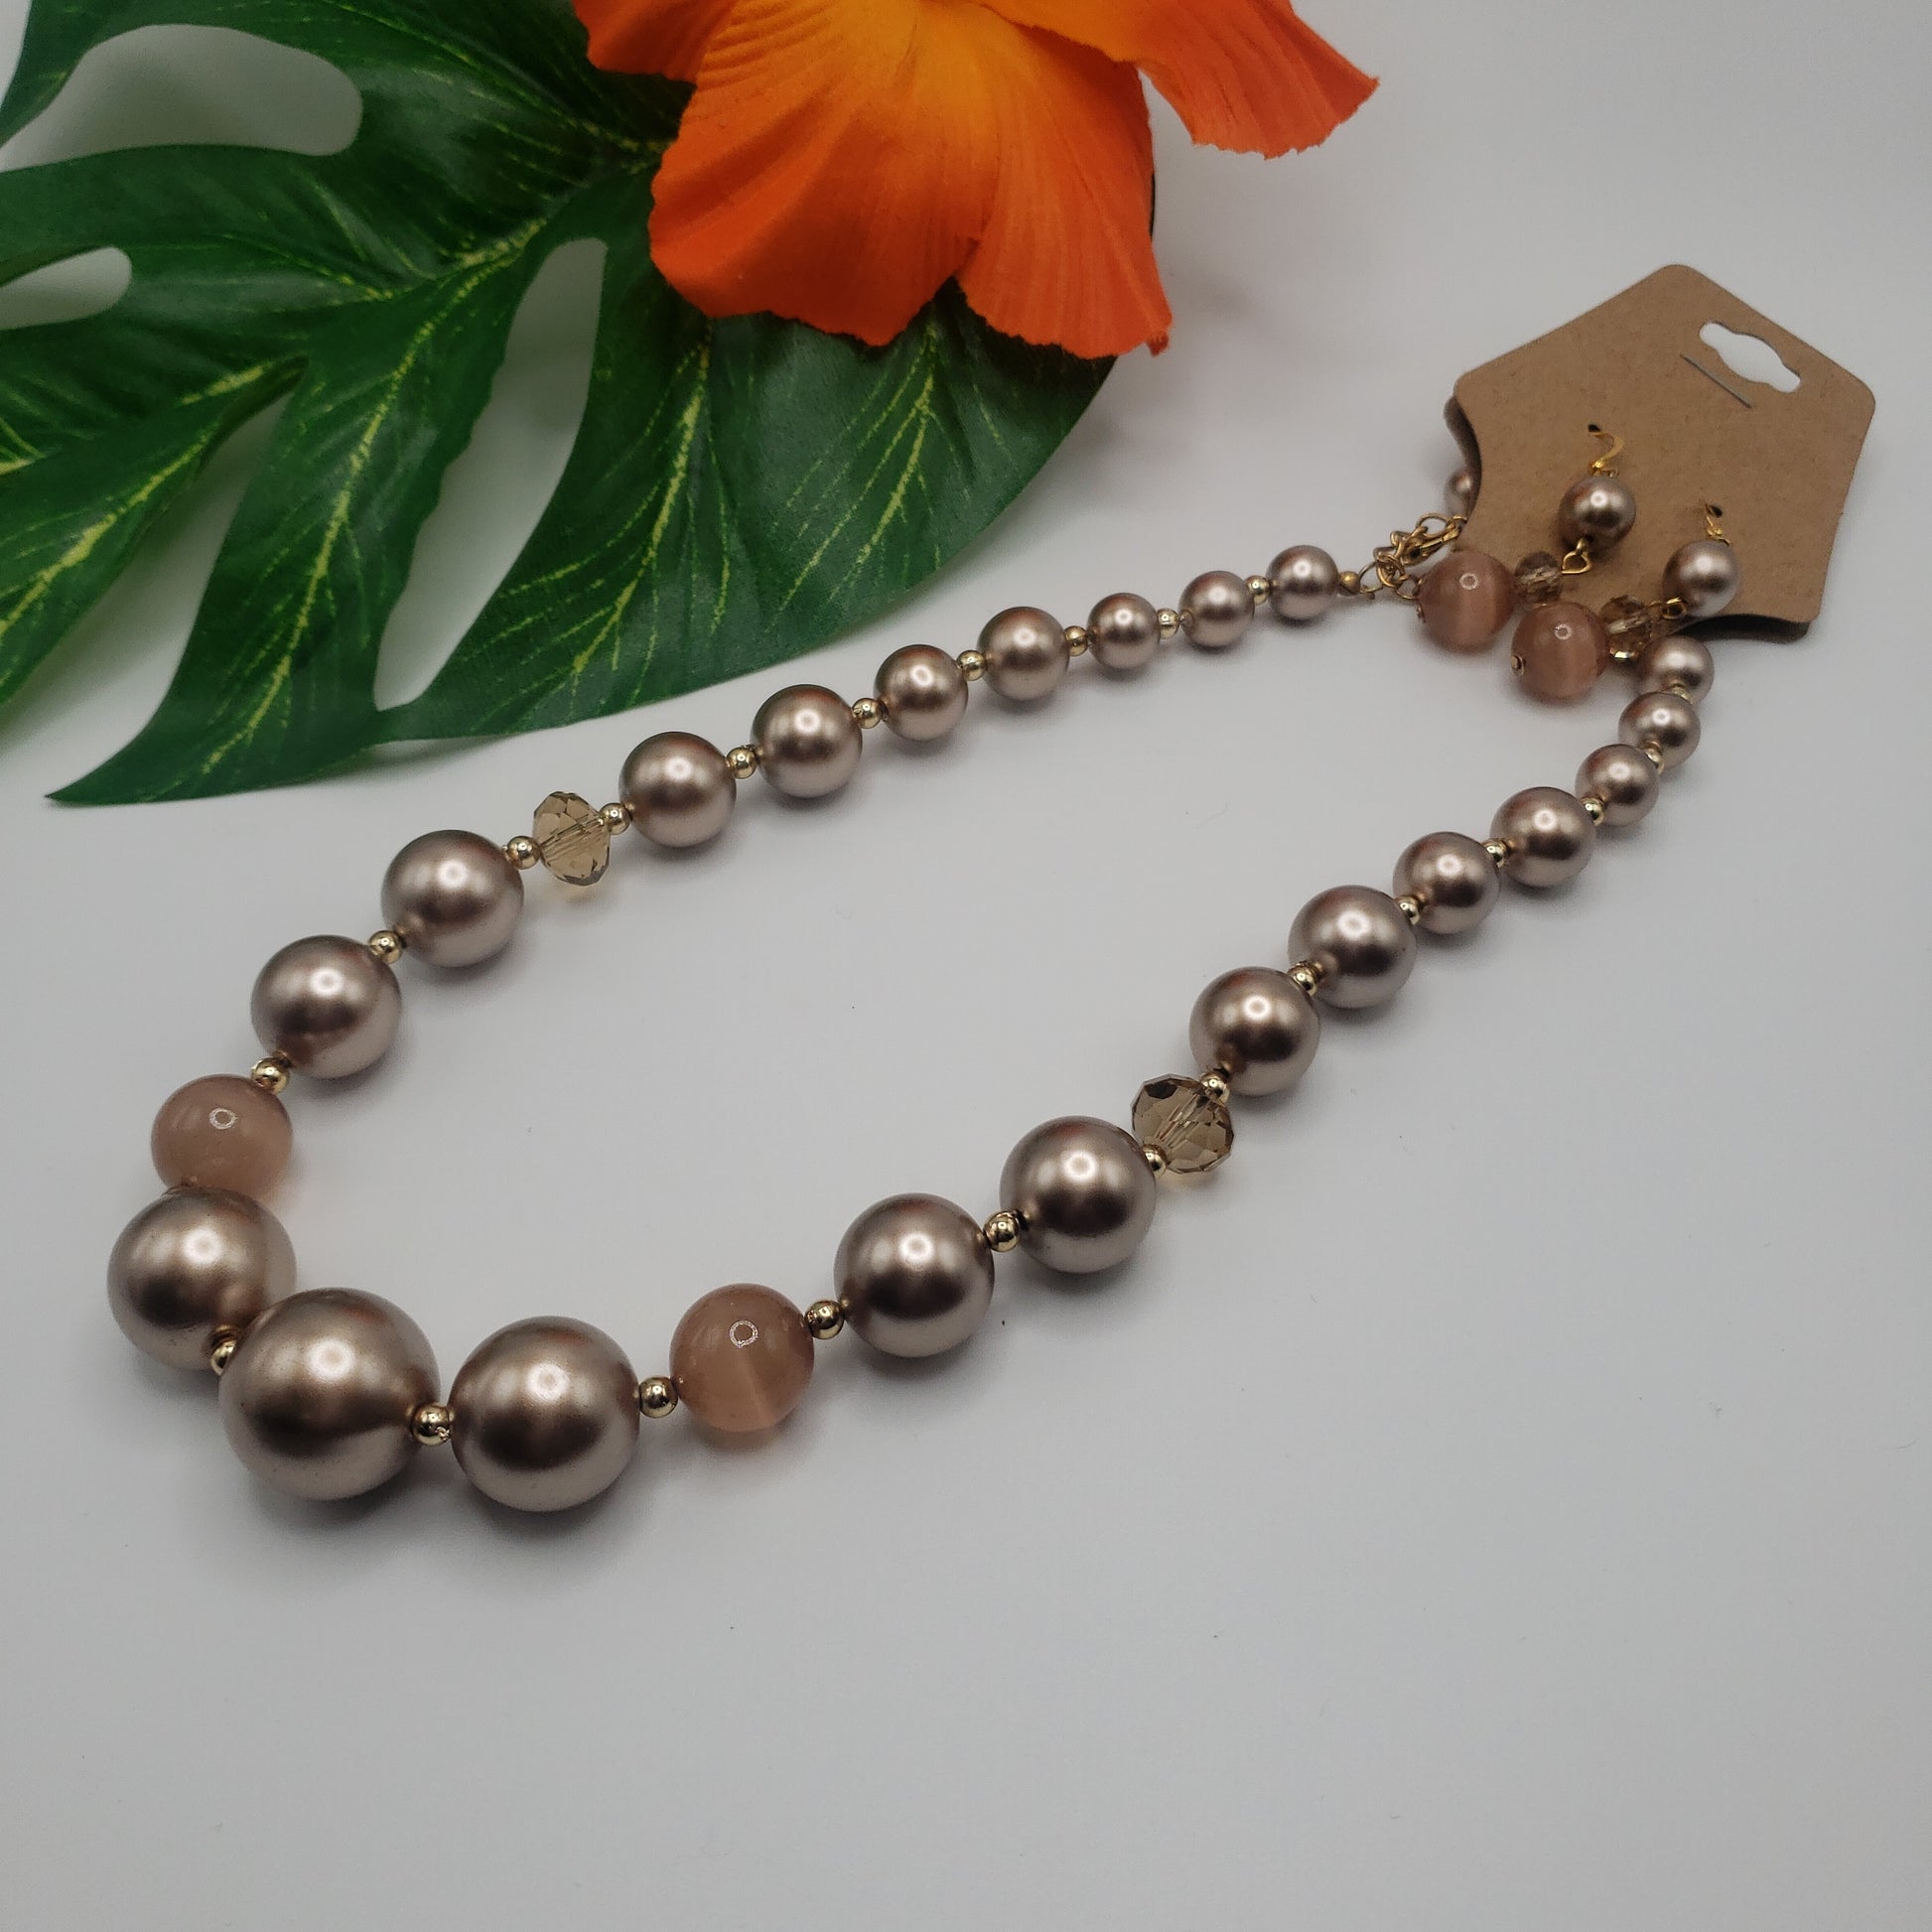 A "CHAMPAGNE BEADS 17"" NECKLACE SET" by SPECIAL EFFECTS with pearls and a flower on it.